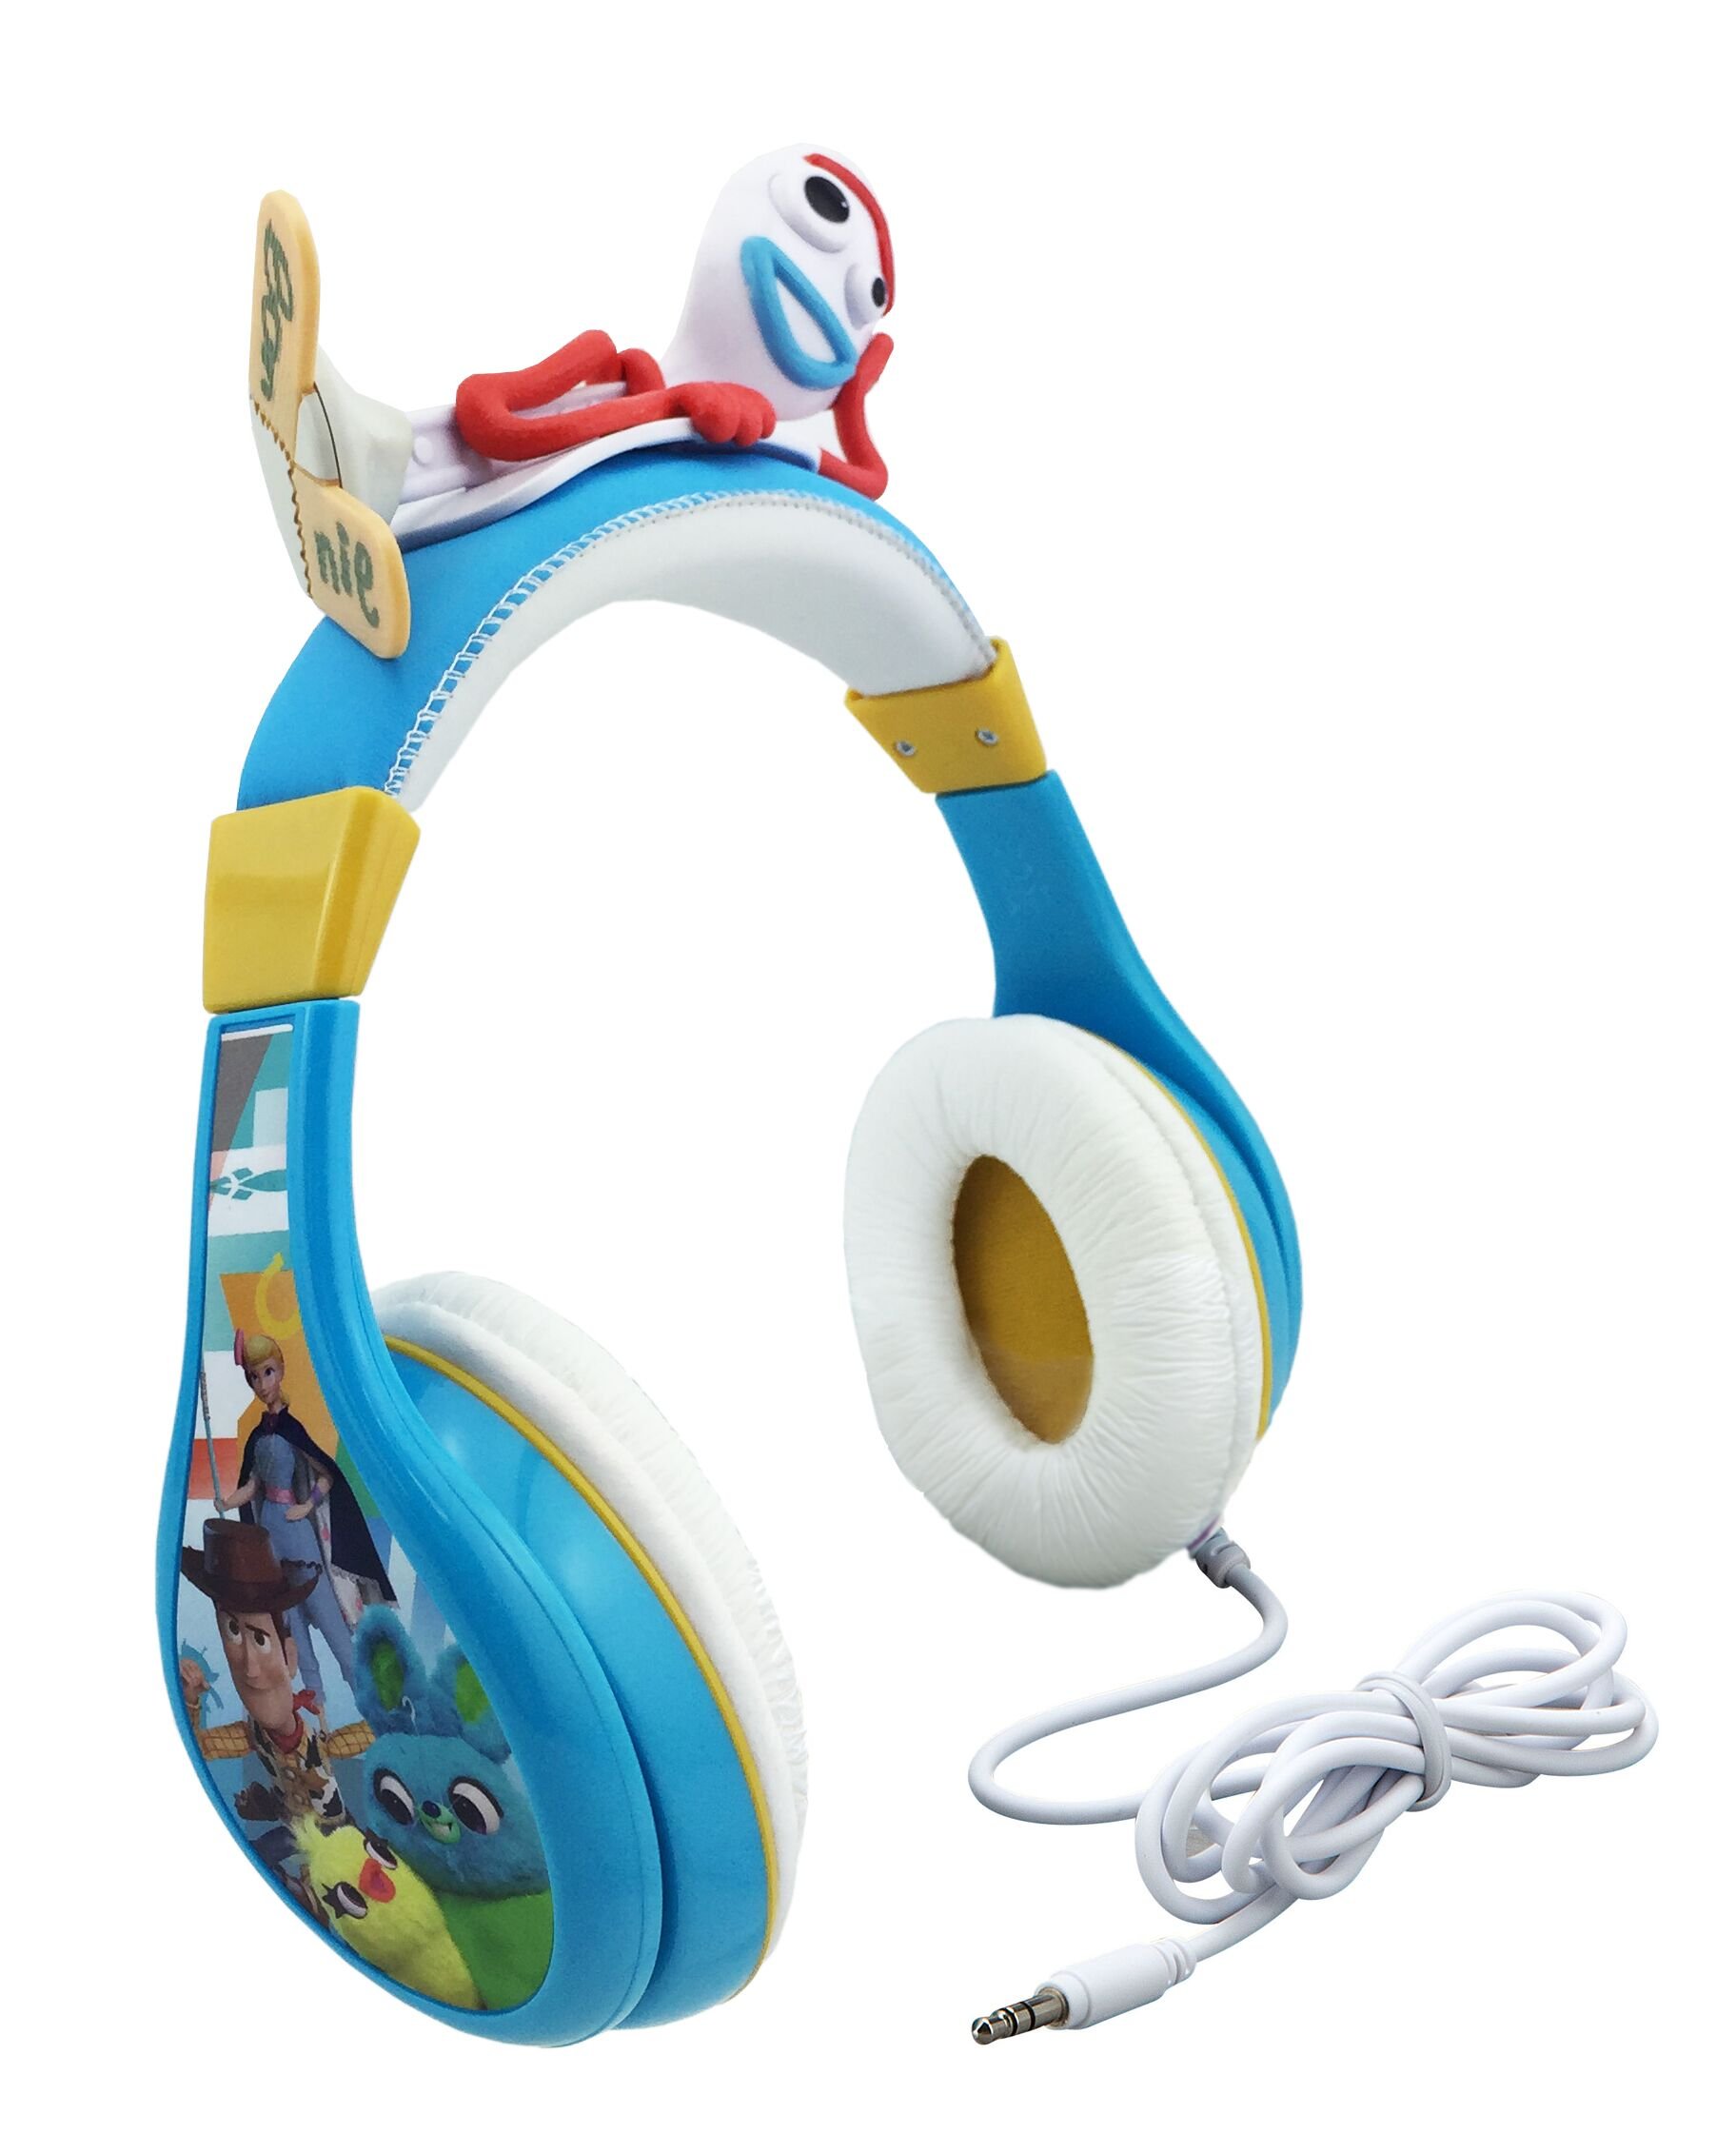 eKids - Toy Story 4 - Over-ear Headphone with volume limiter